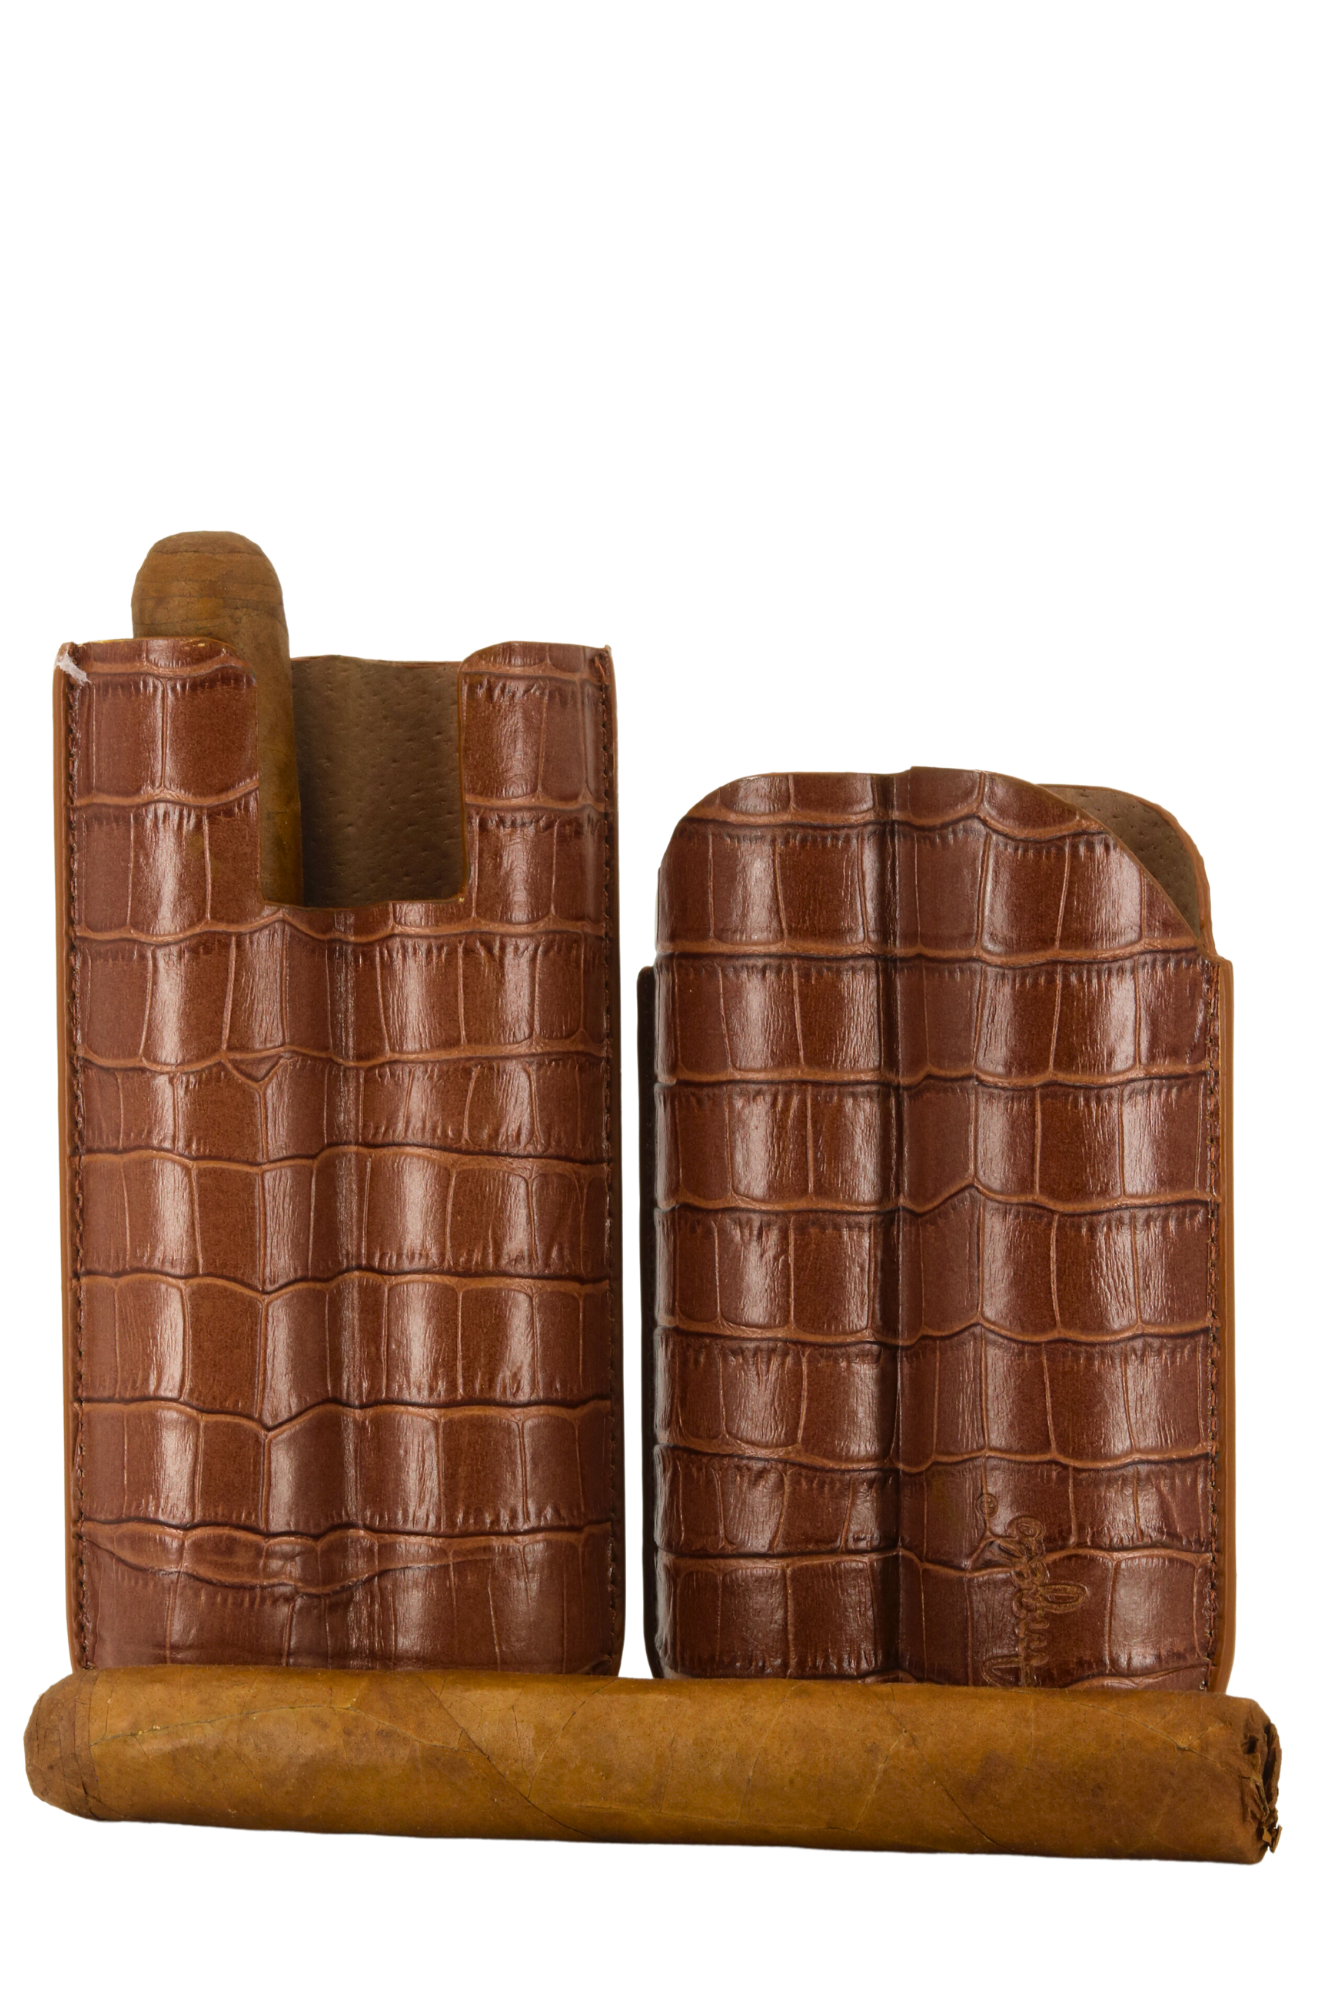 Angelo Leather Cigar Case - 2 Cigars